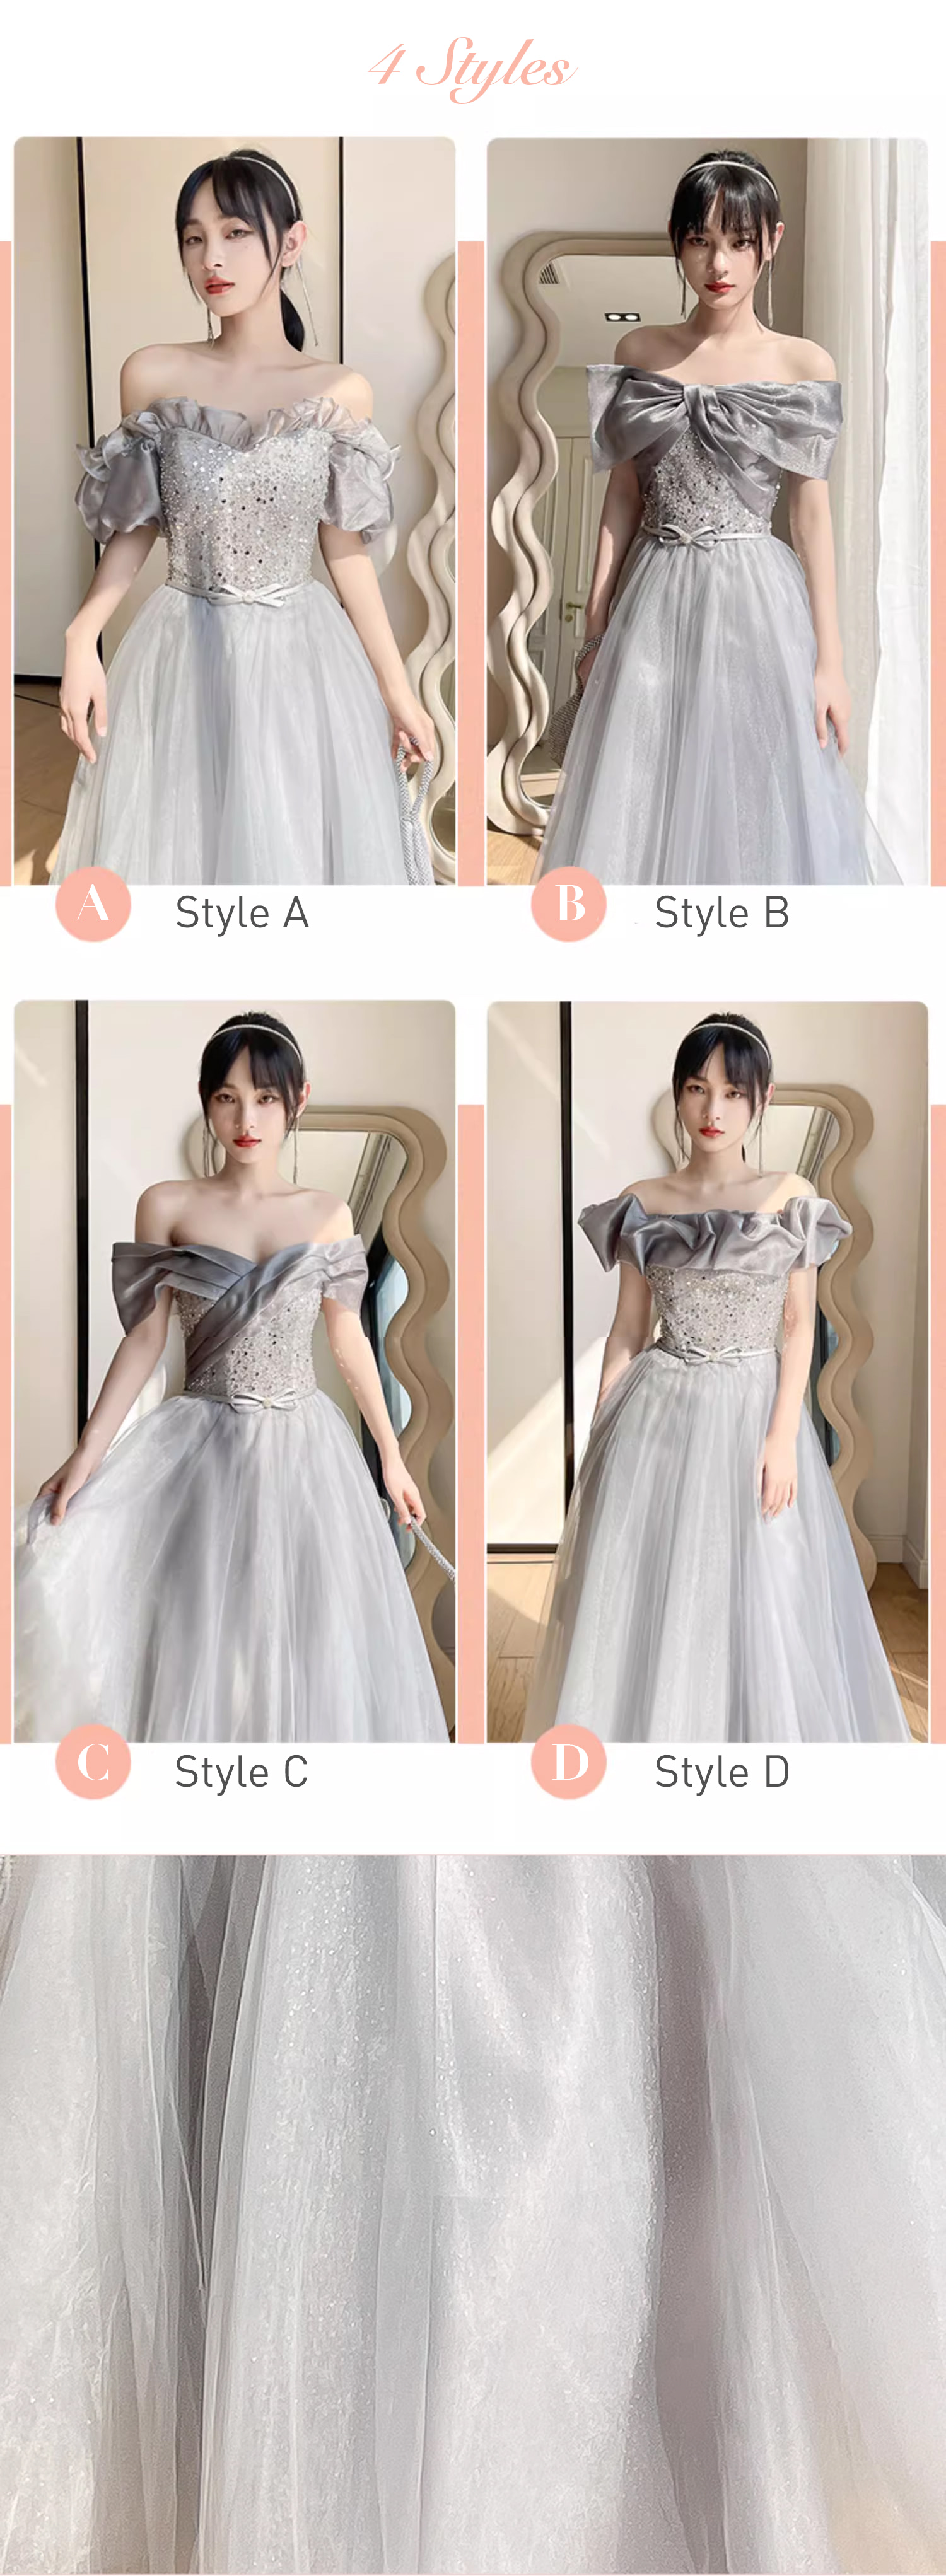 Fashion-A-line-Summer-Grey-Tulle-Evening-Prom-Bridesmaid-Maxi-Dress12